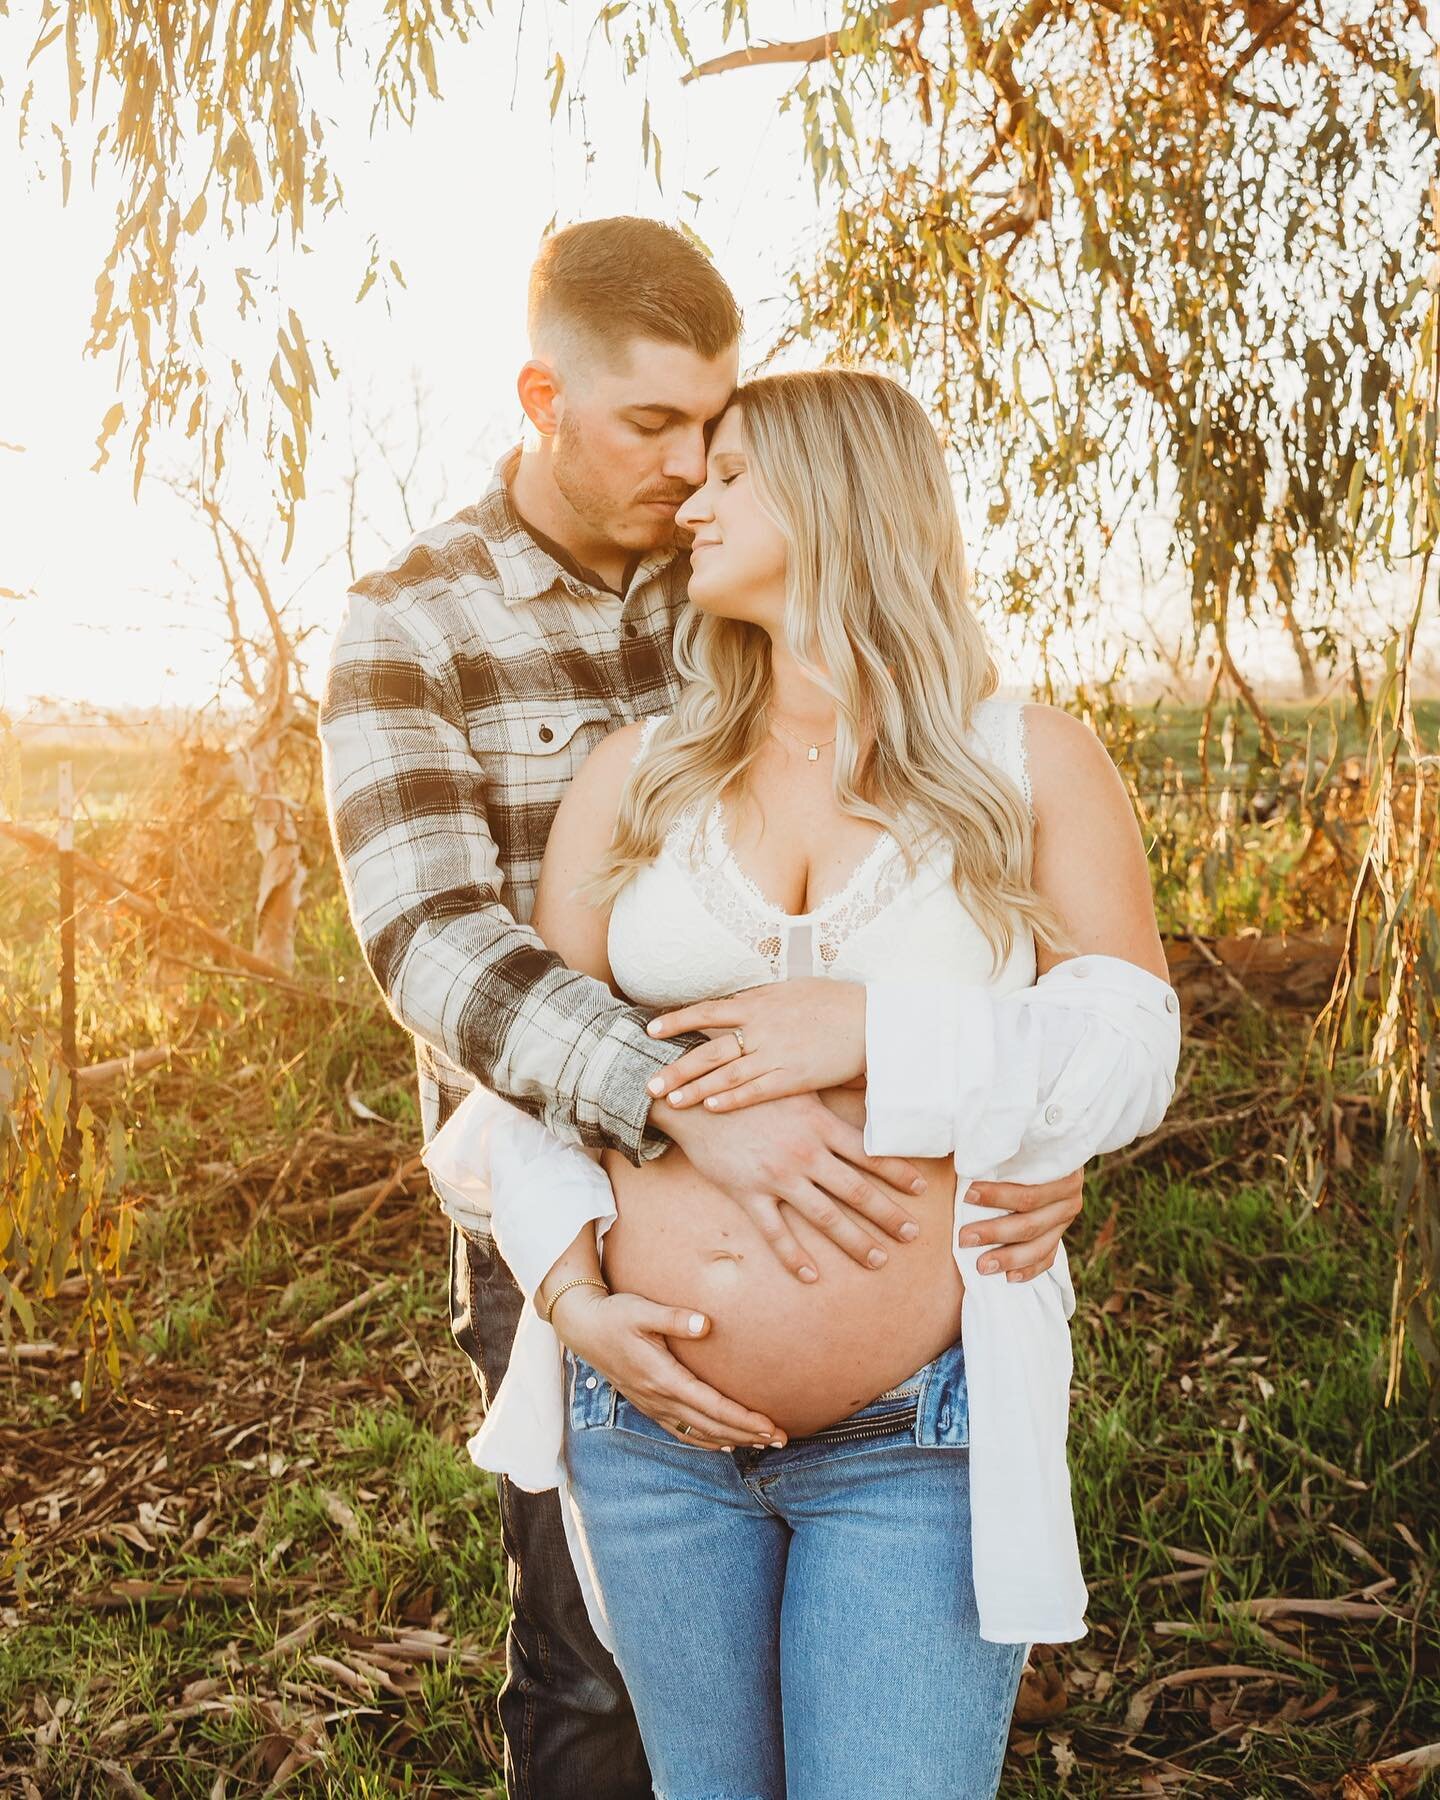 Throwing it back to last winter with this 🔥 couple.  I must say we nailed this maternity session.  Did I mention that I love photographing baby bellies?  Sami was absolutely glowing and wait til you see what a cute little human they made&hellip; sta